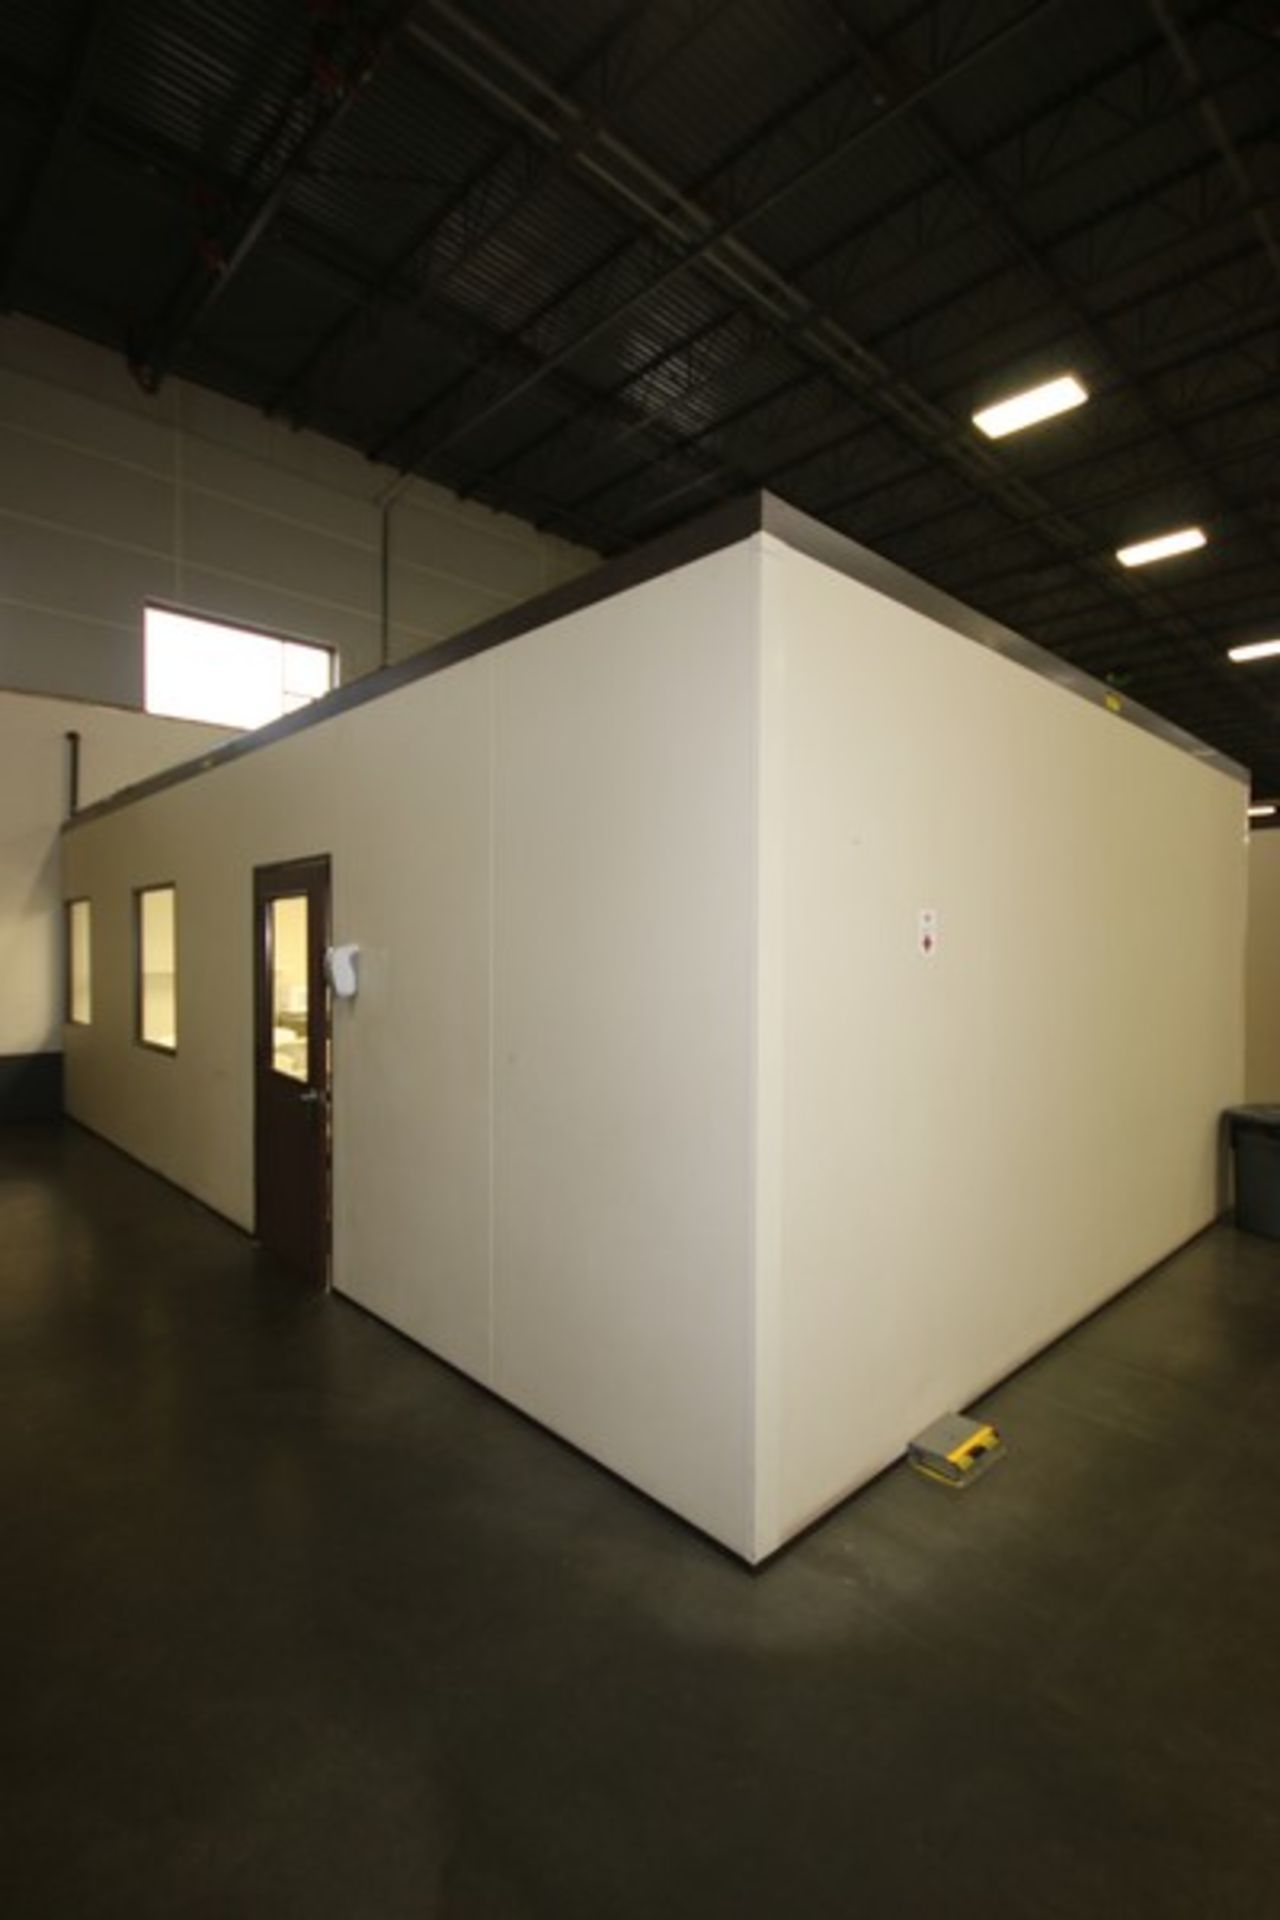 Modular Office Building, Overall Dims.: 28' L x 16' W x